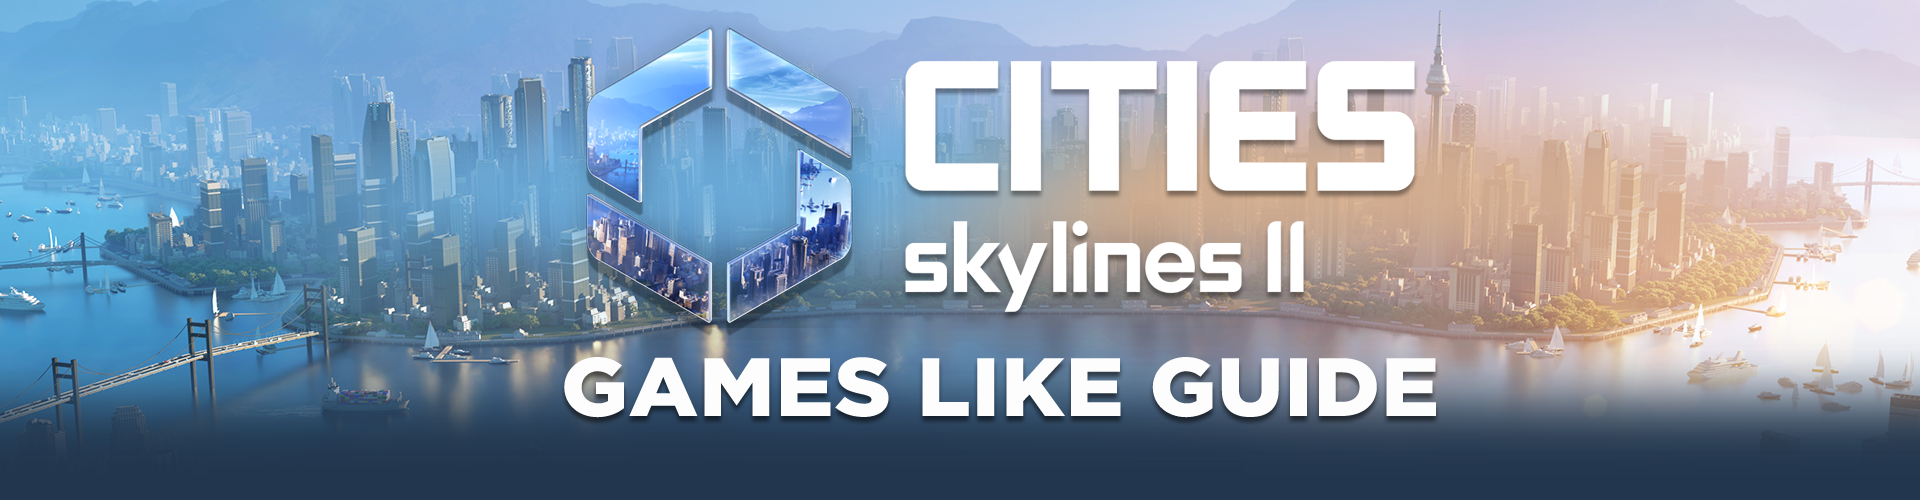 Cities Skylines 2 Games Like Guide